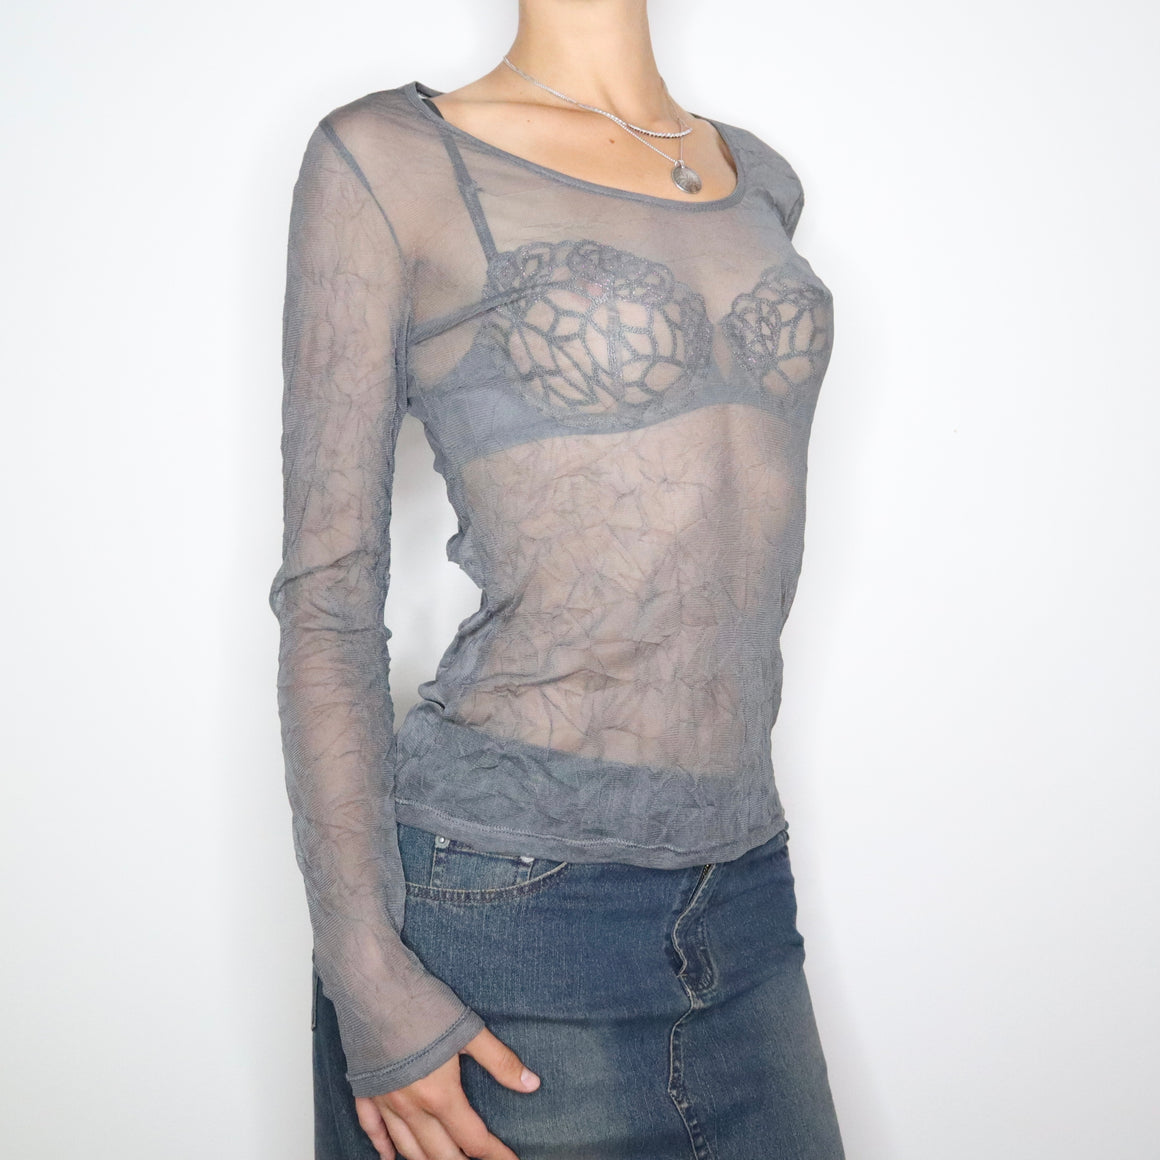 French Mesh Long Sleeve Top (M-L)